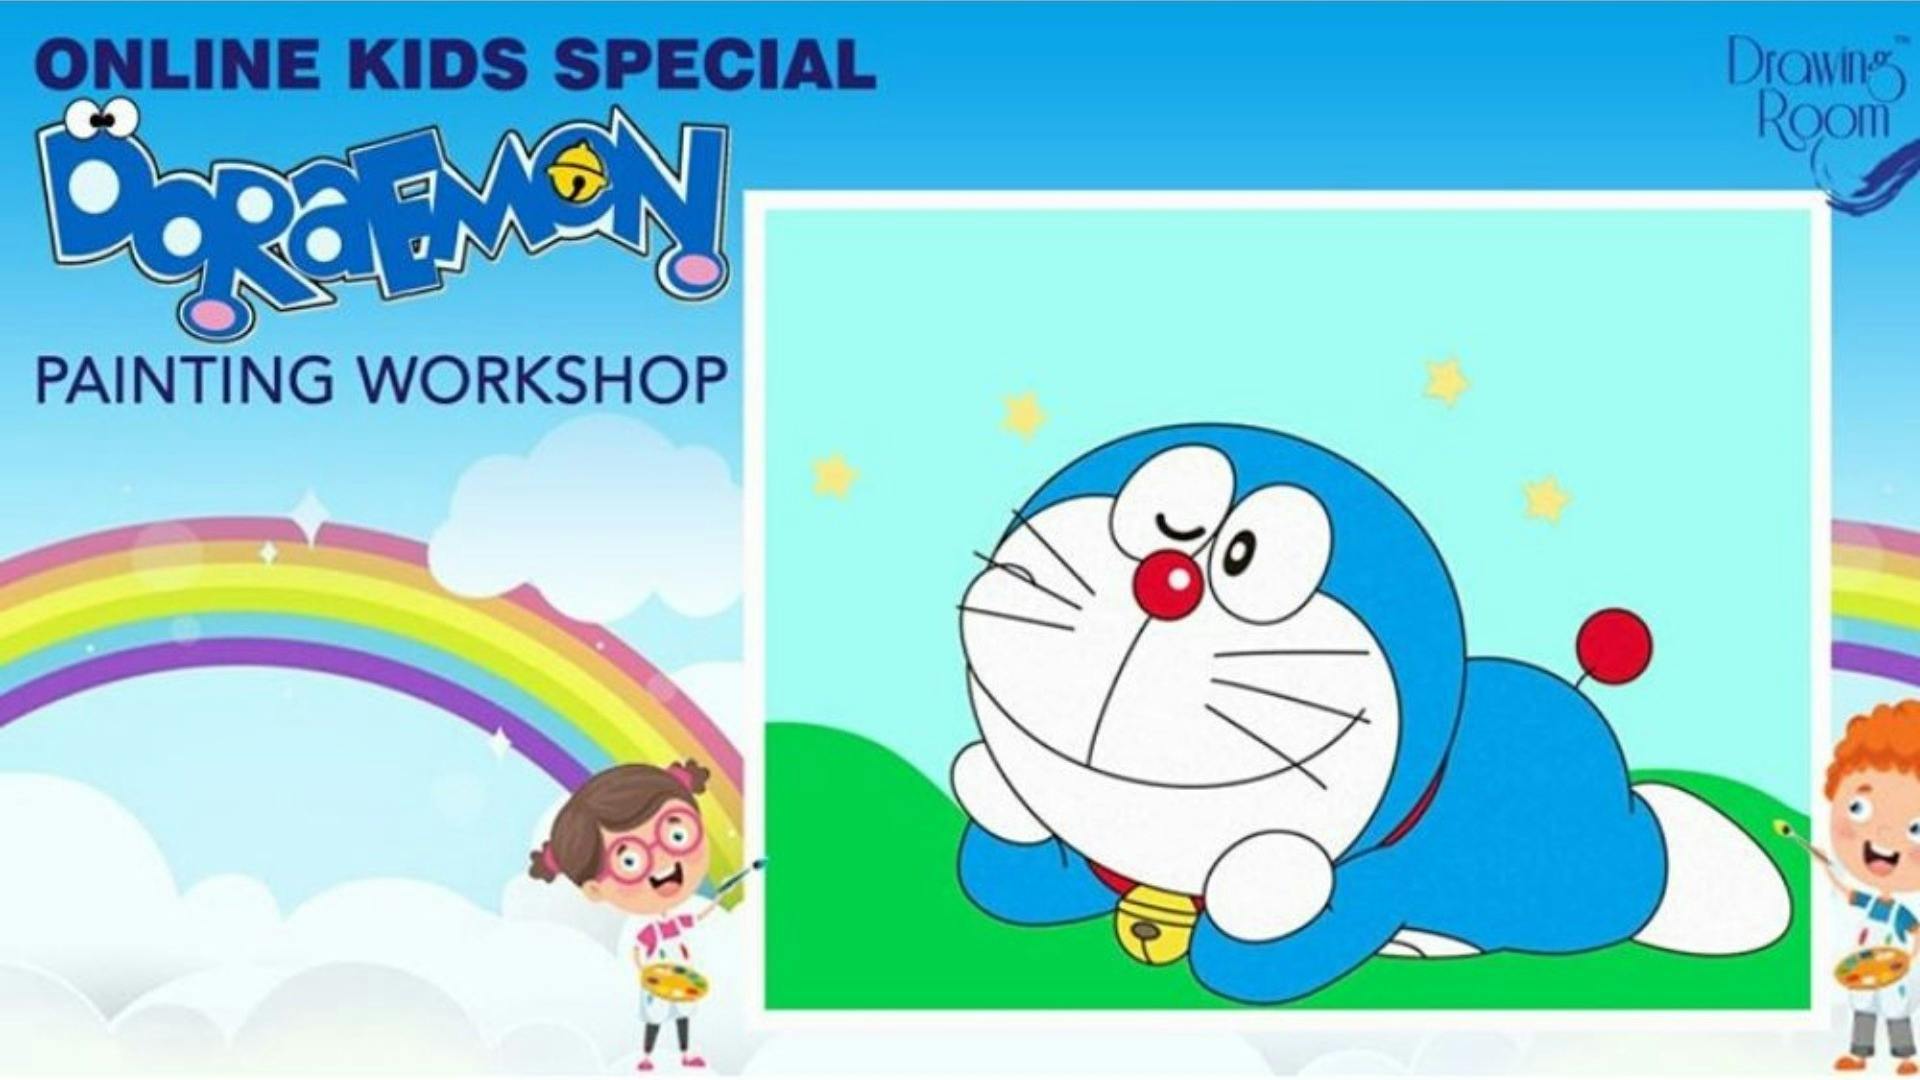 How to draw a Doraemon Step by Step